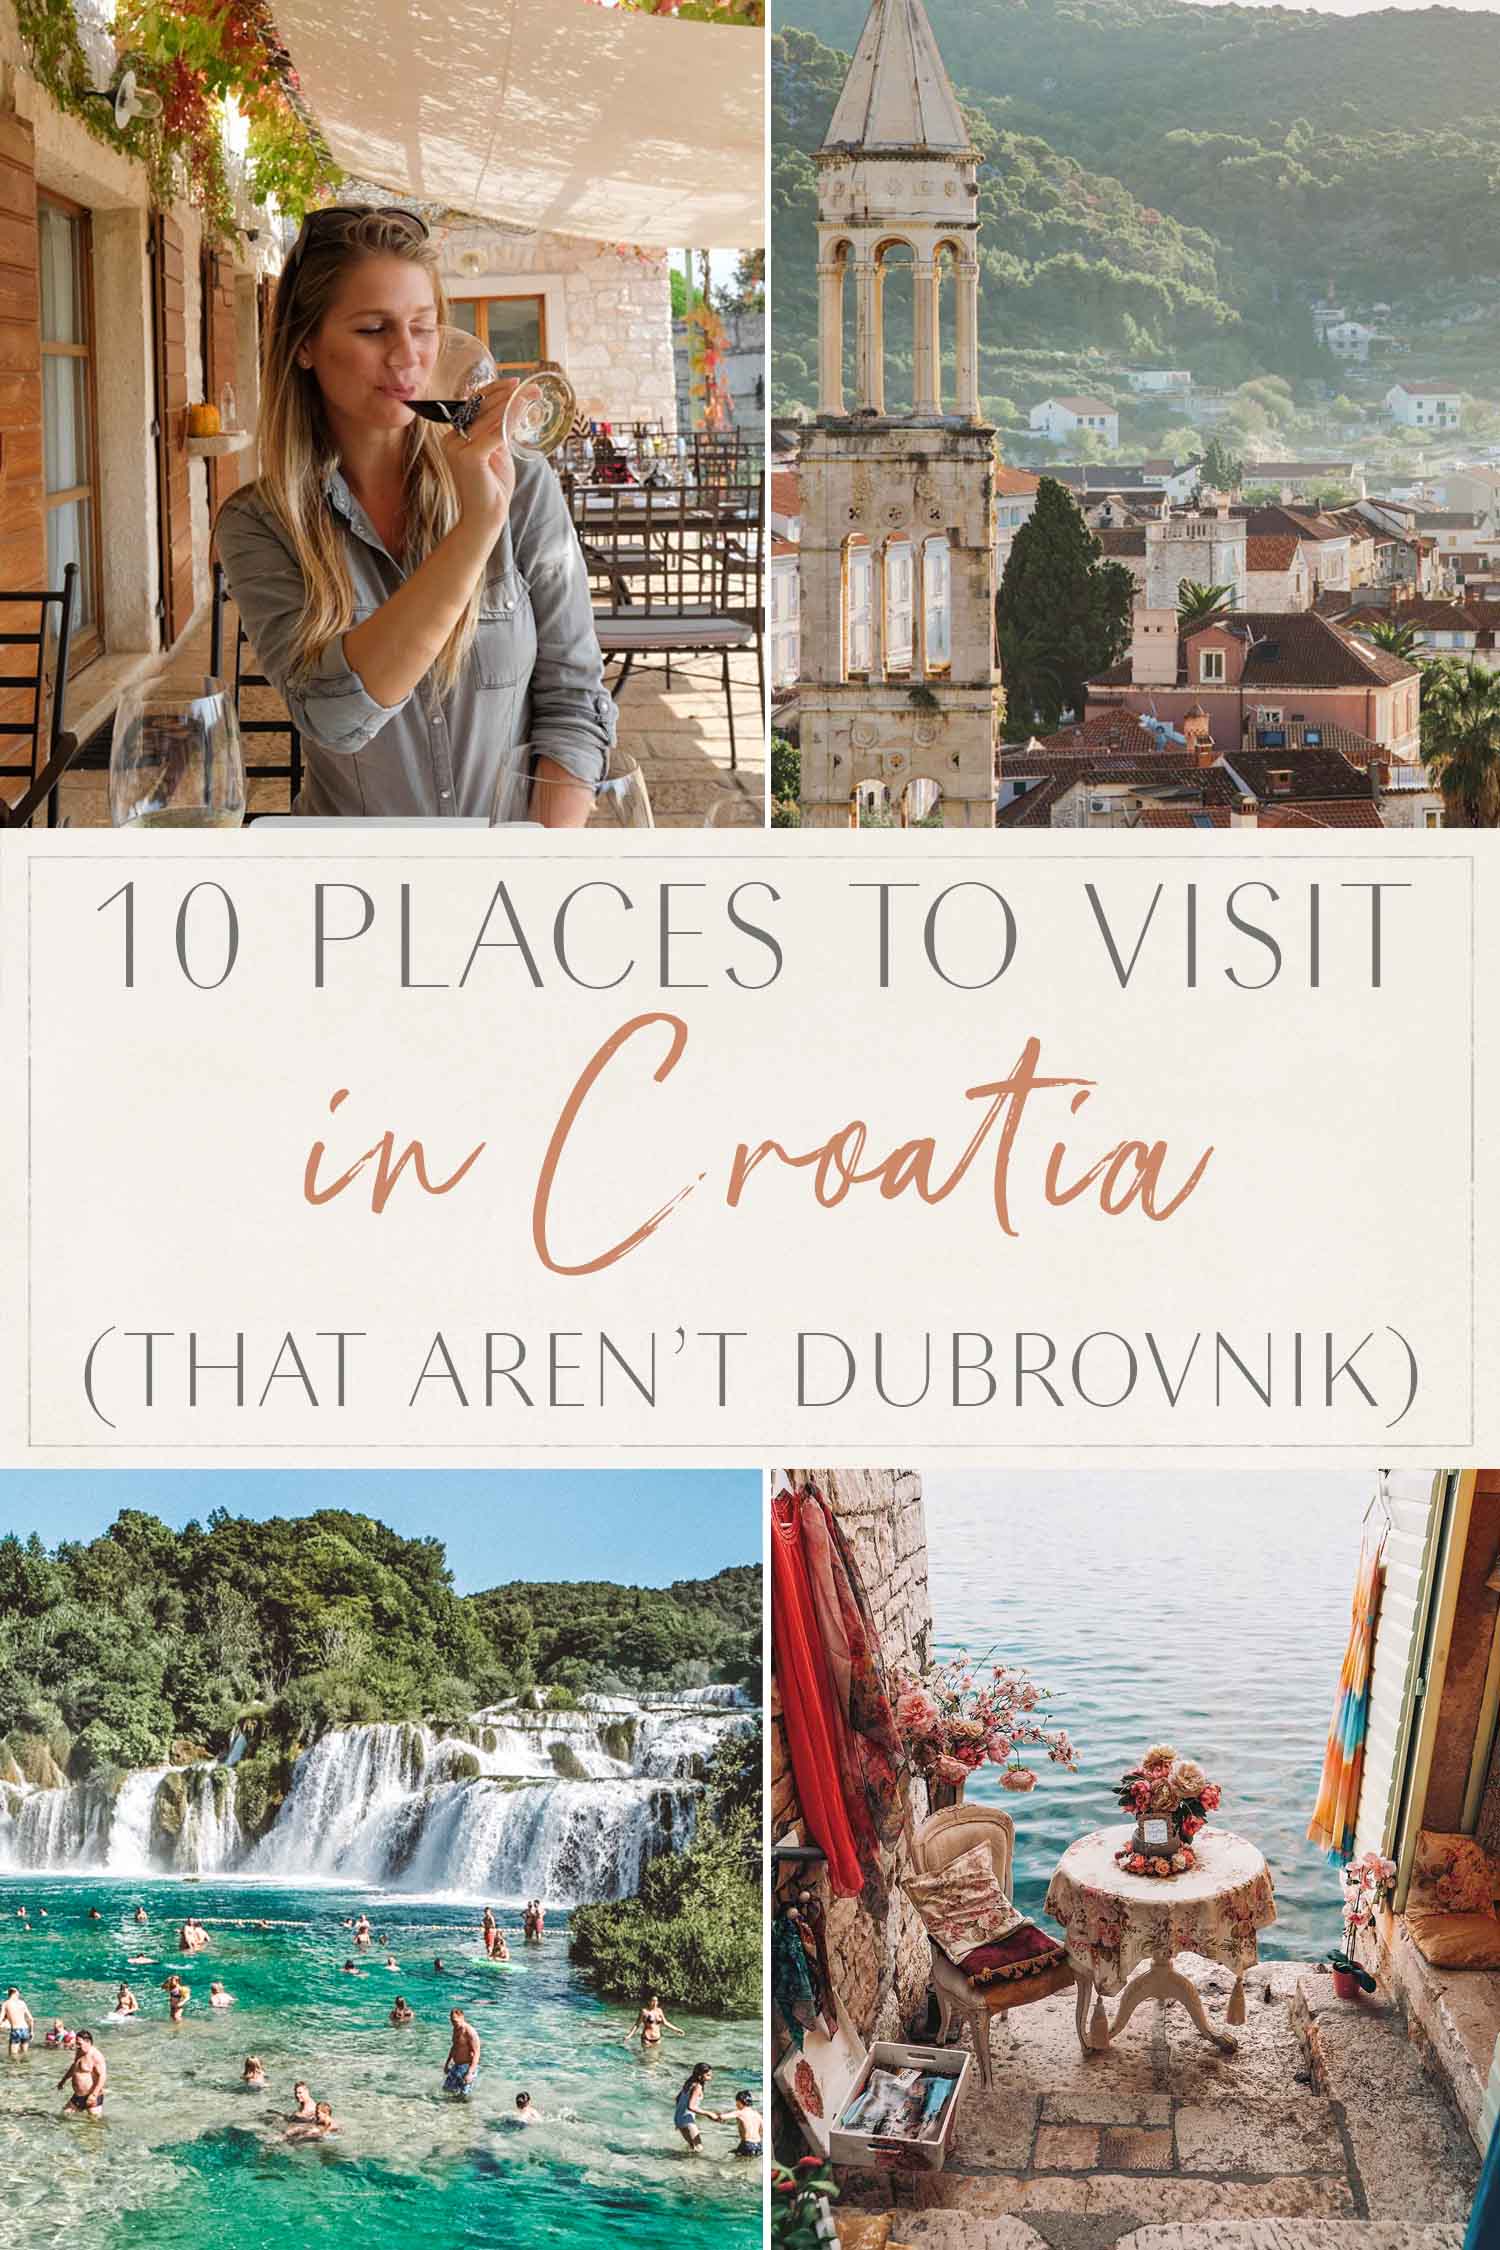 10 Places to Visit in Croatia